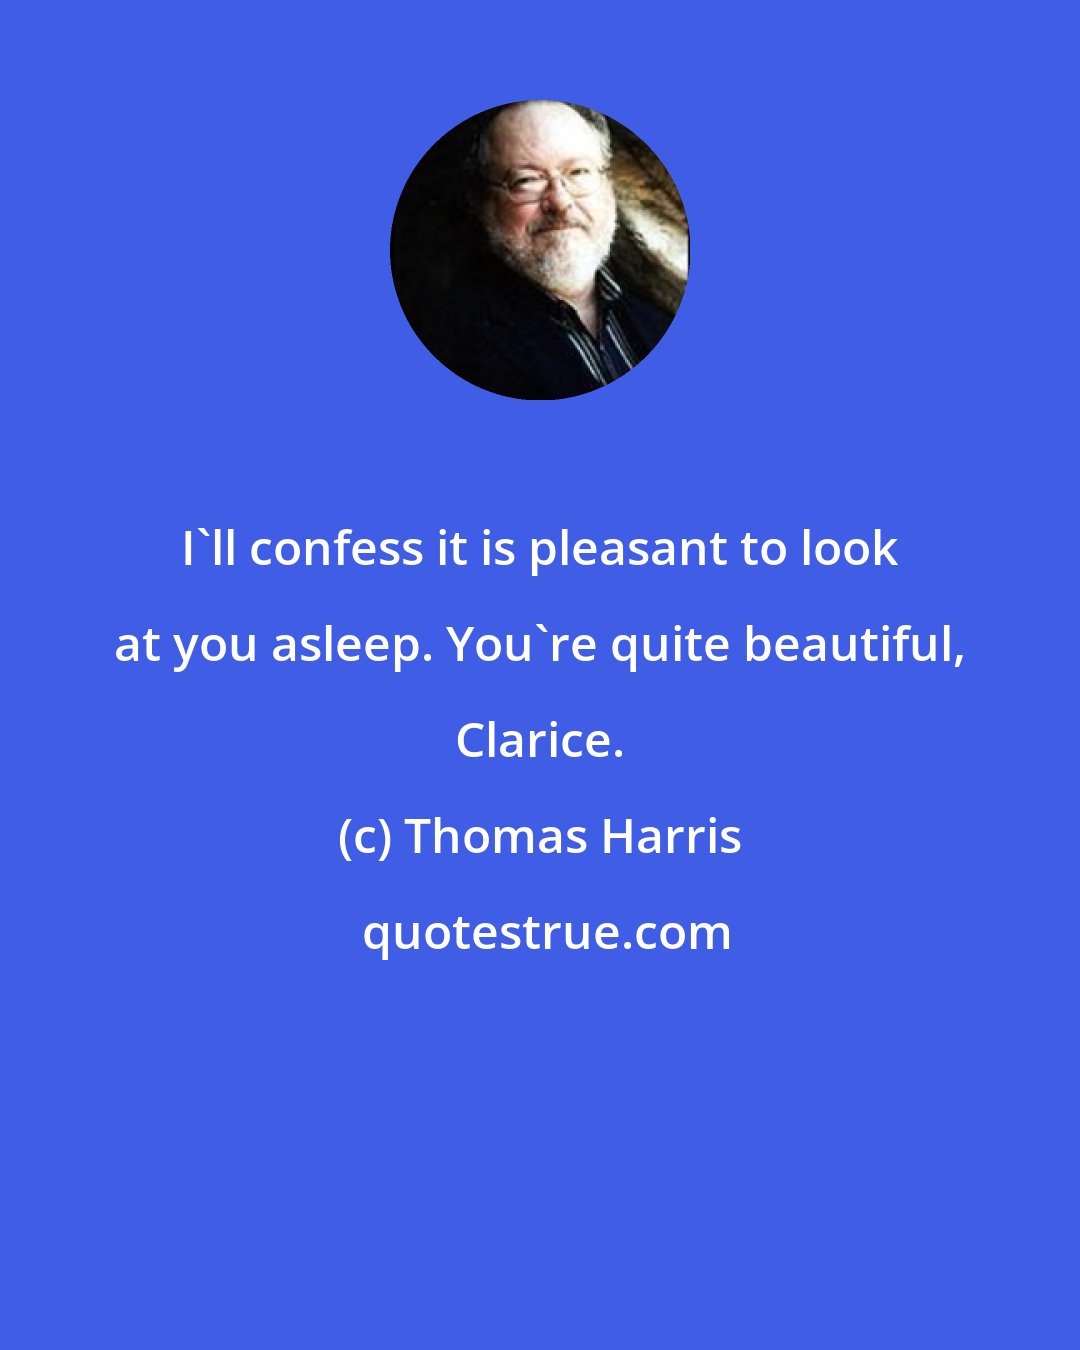 Thomas Harris: I'll confess it is pleasant to look at you asleep. You're quite beautiful, Clarice.